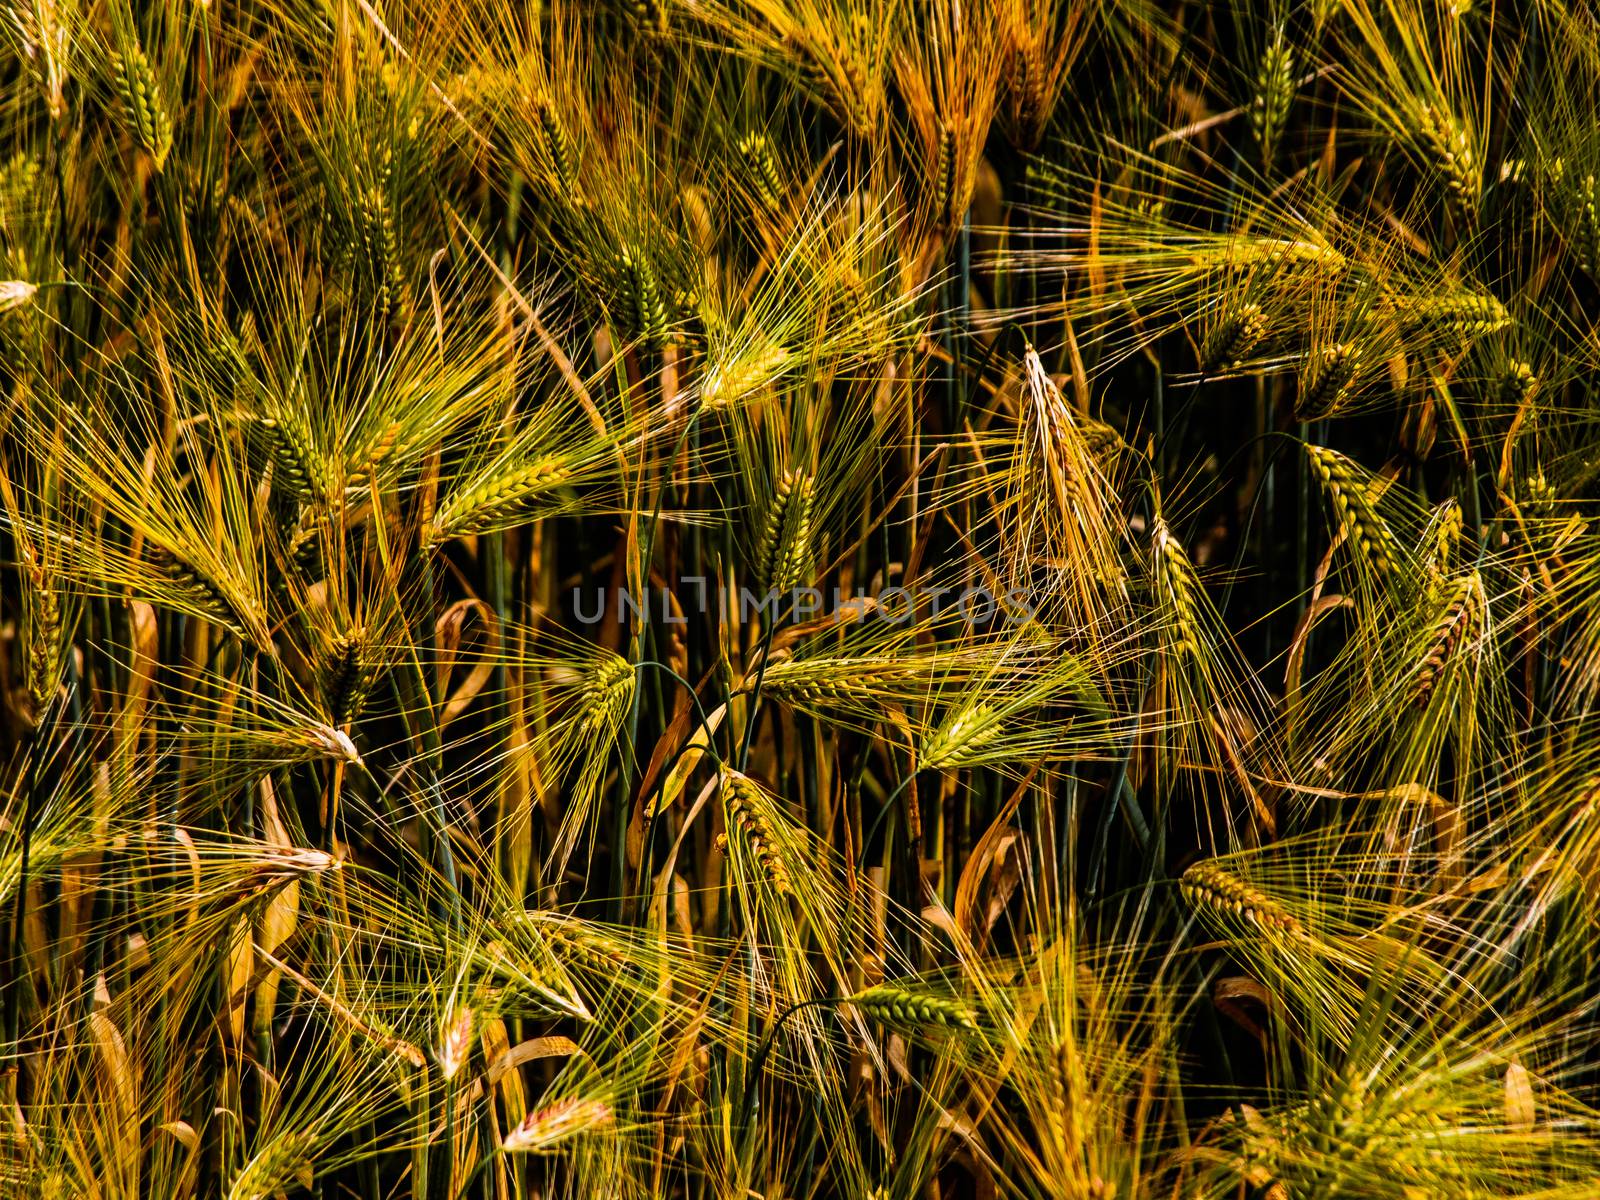 Golden grain by pyty